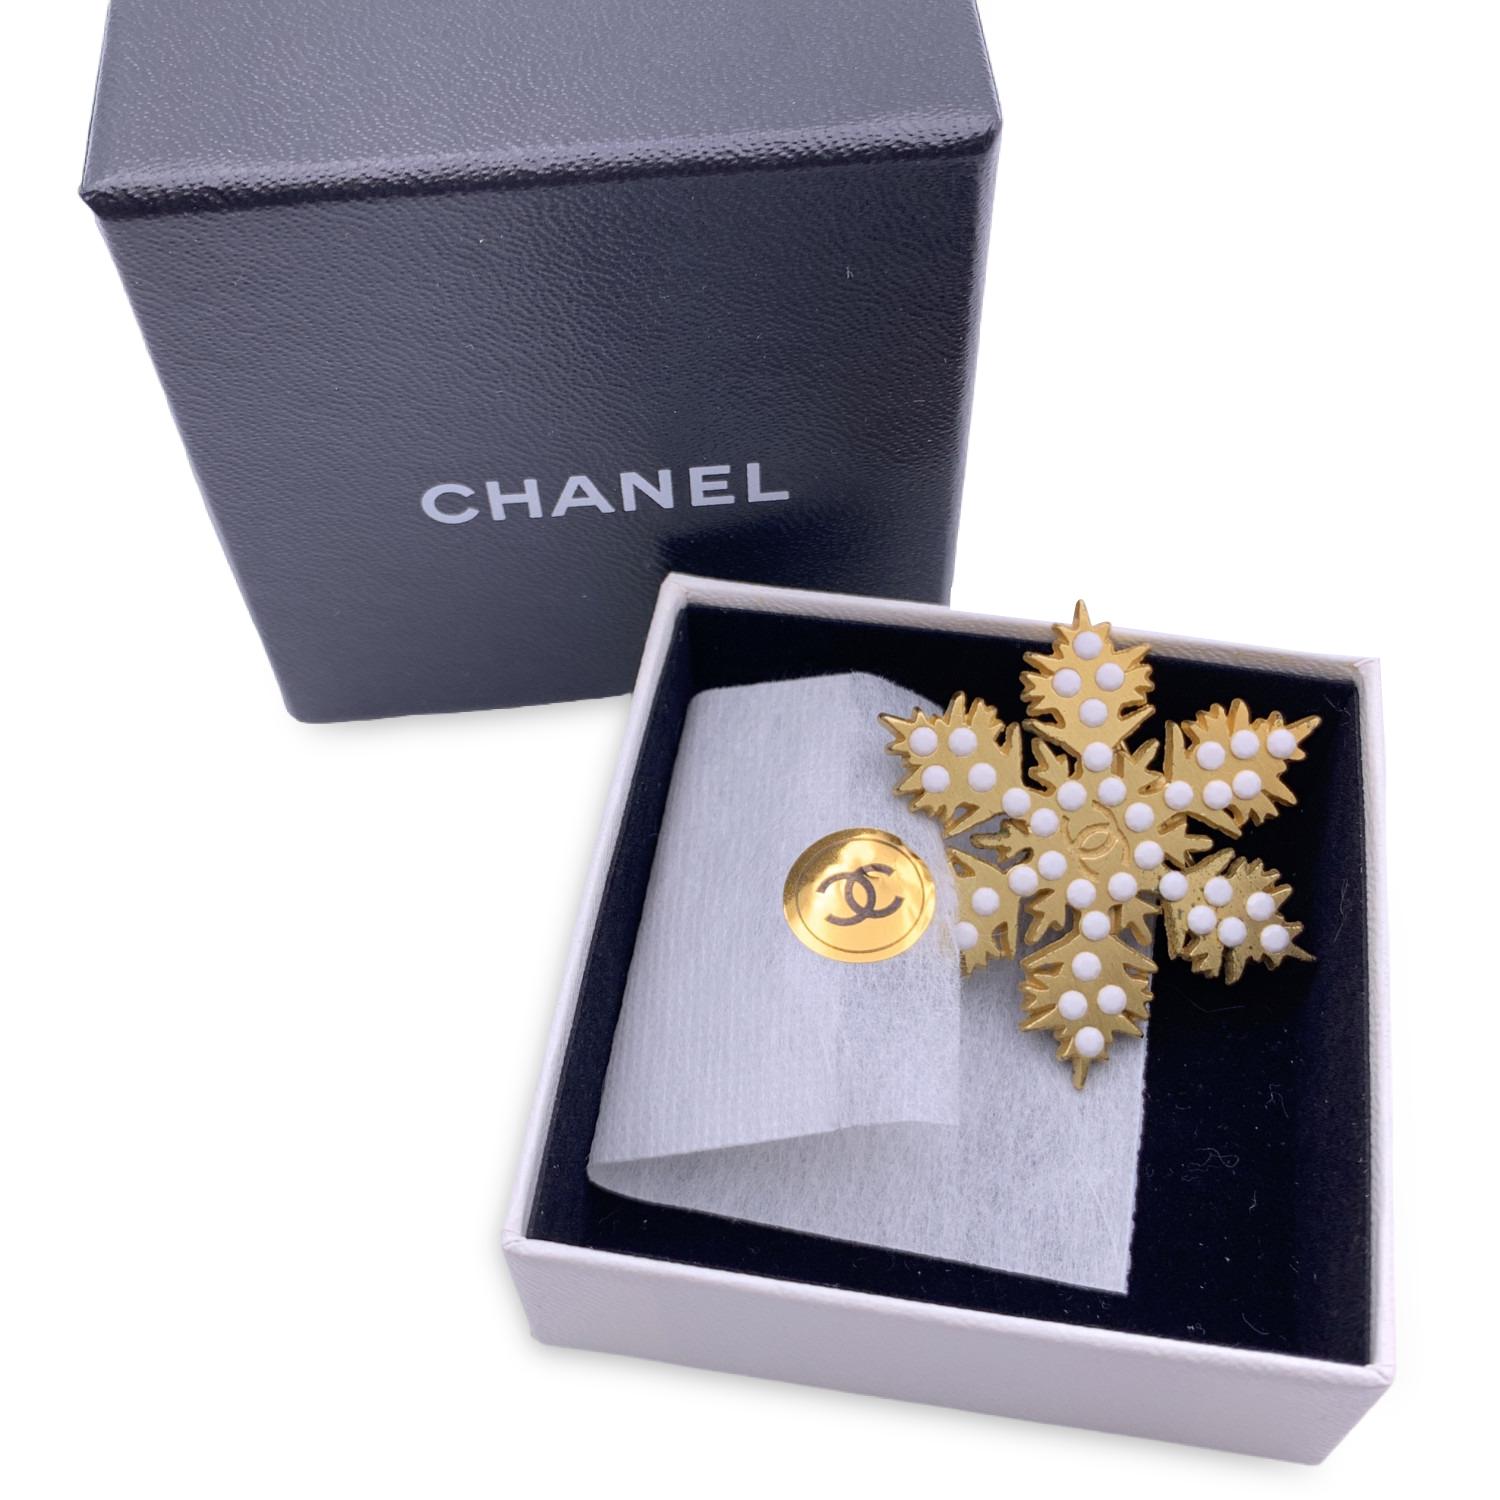 Beautiful Chanel Snowflake Brooch. Gold metal with white rhinestones. 'Chanel 01 CC A - Made in France' oval tab on the back. Comes with its original Chanel box.


Condition

A - EXCELLENT

Gently used. Please check the photos carefully and ask if